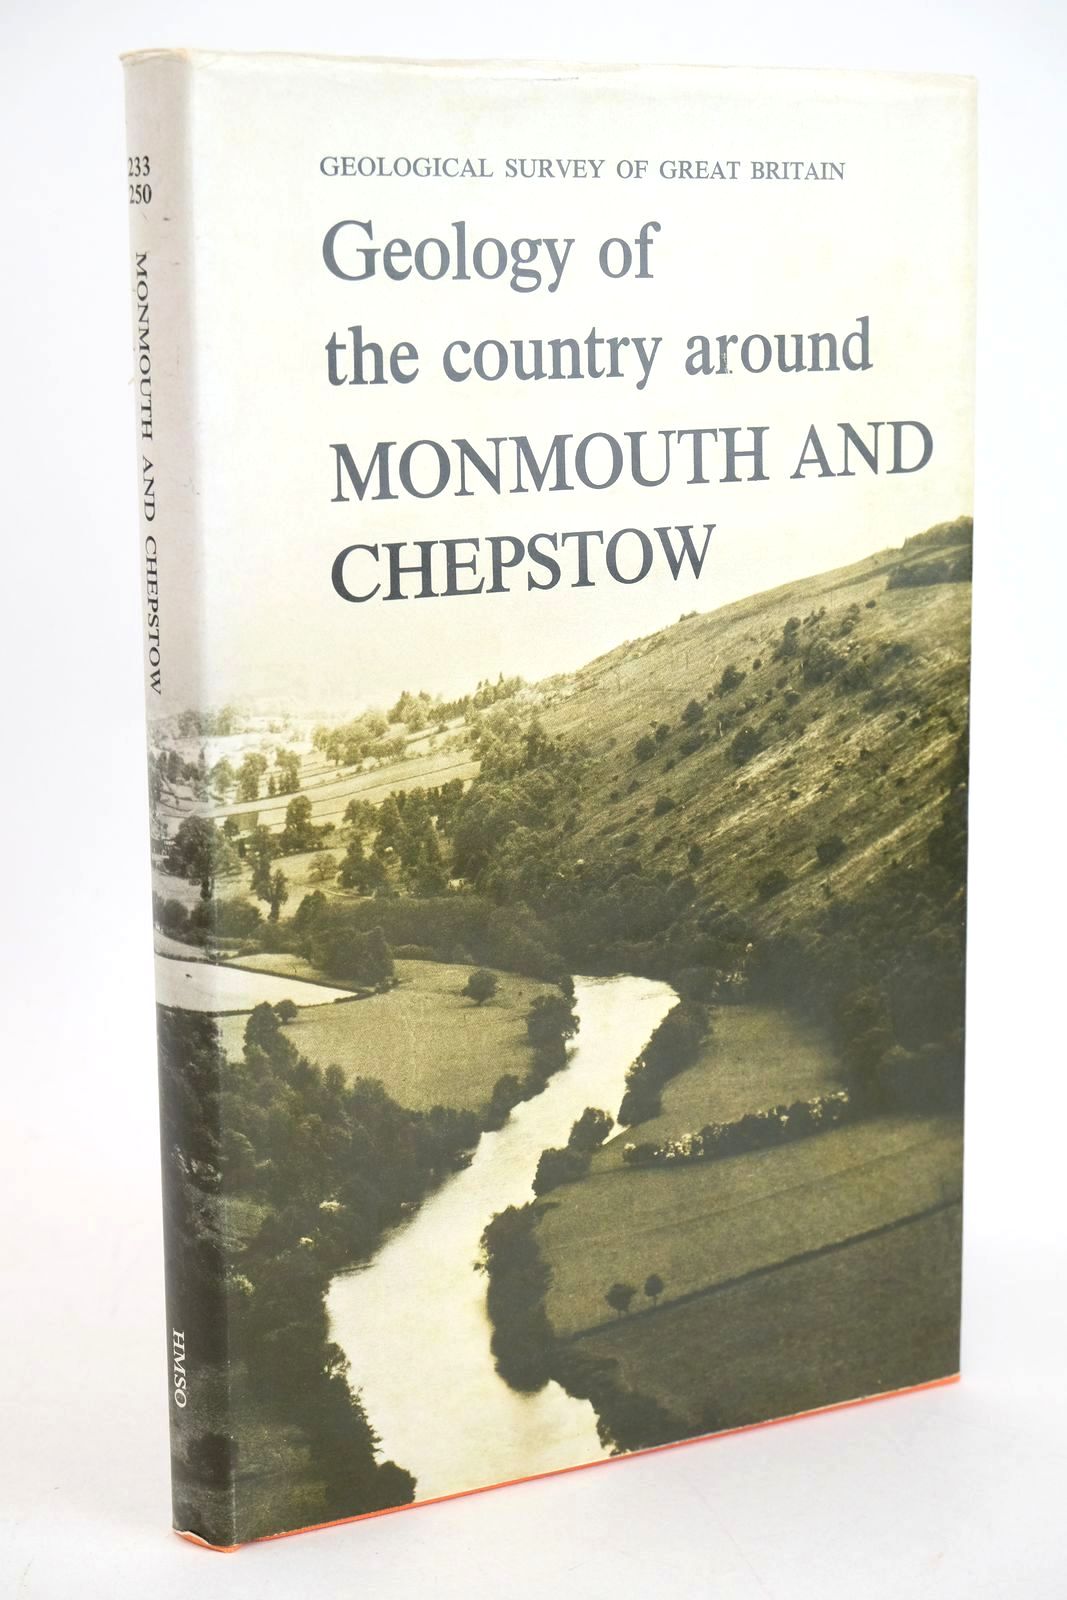 Photo of GEOLOGY OF THE COUNTRY AROUND MONMOUTH AND CHEPSTOW written by Welch, F.B.A. Trotter, F.M. published by HMSO (STOCK CODE: 1327851)  for sale by Stella & Rose's Books